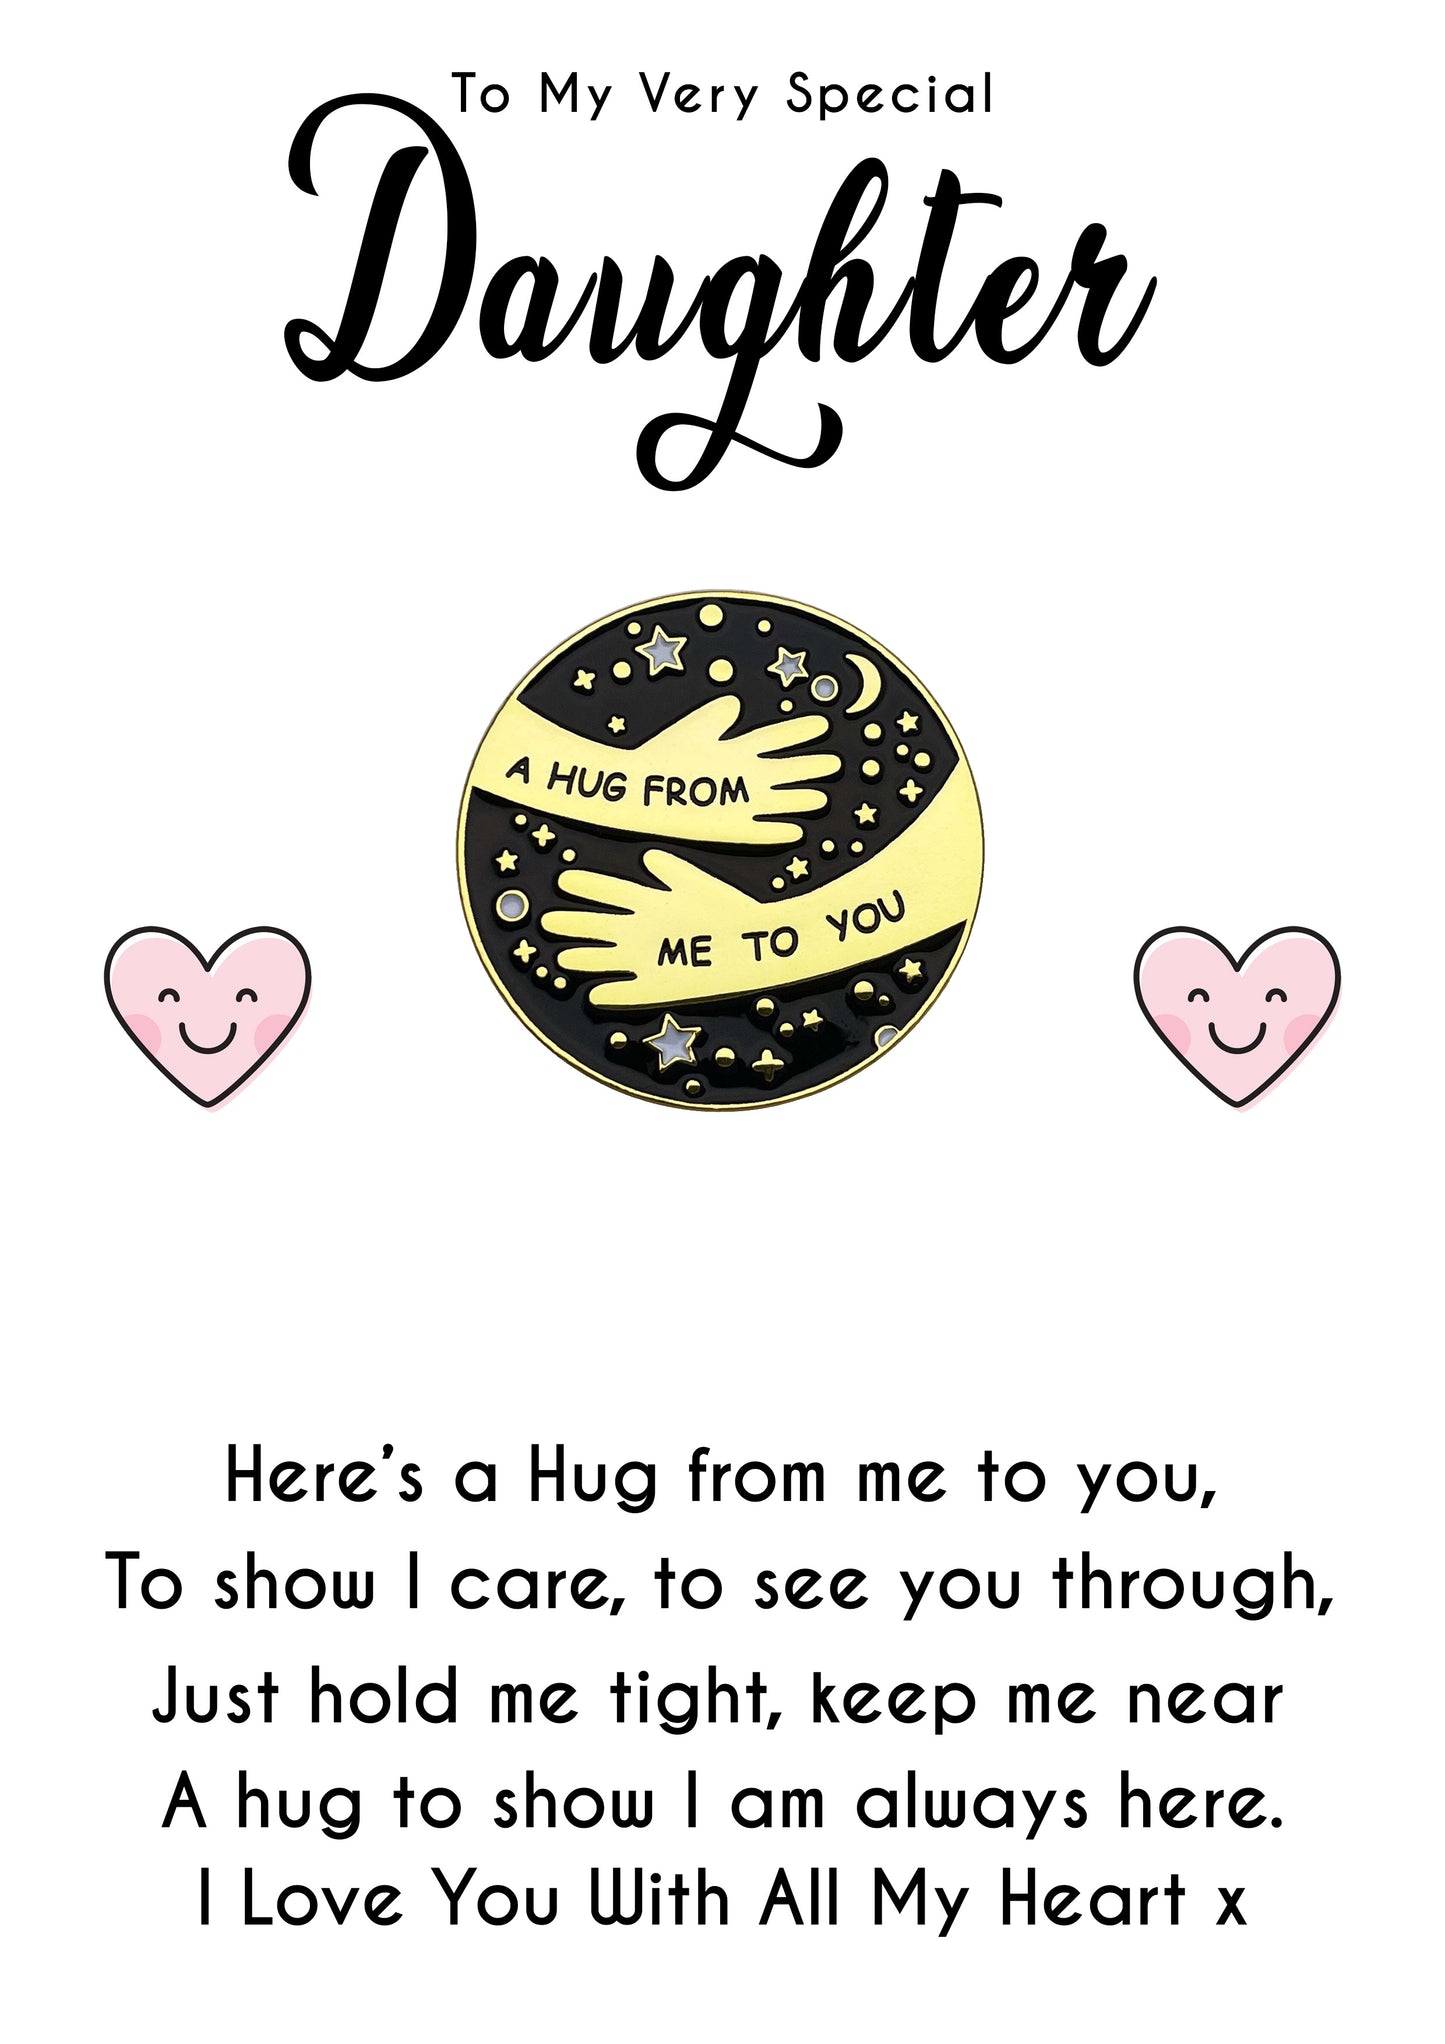 Pocket Hug Pin Badges With Very Special Daughter Heart Message Cards